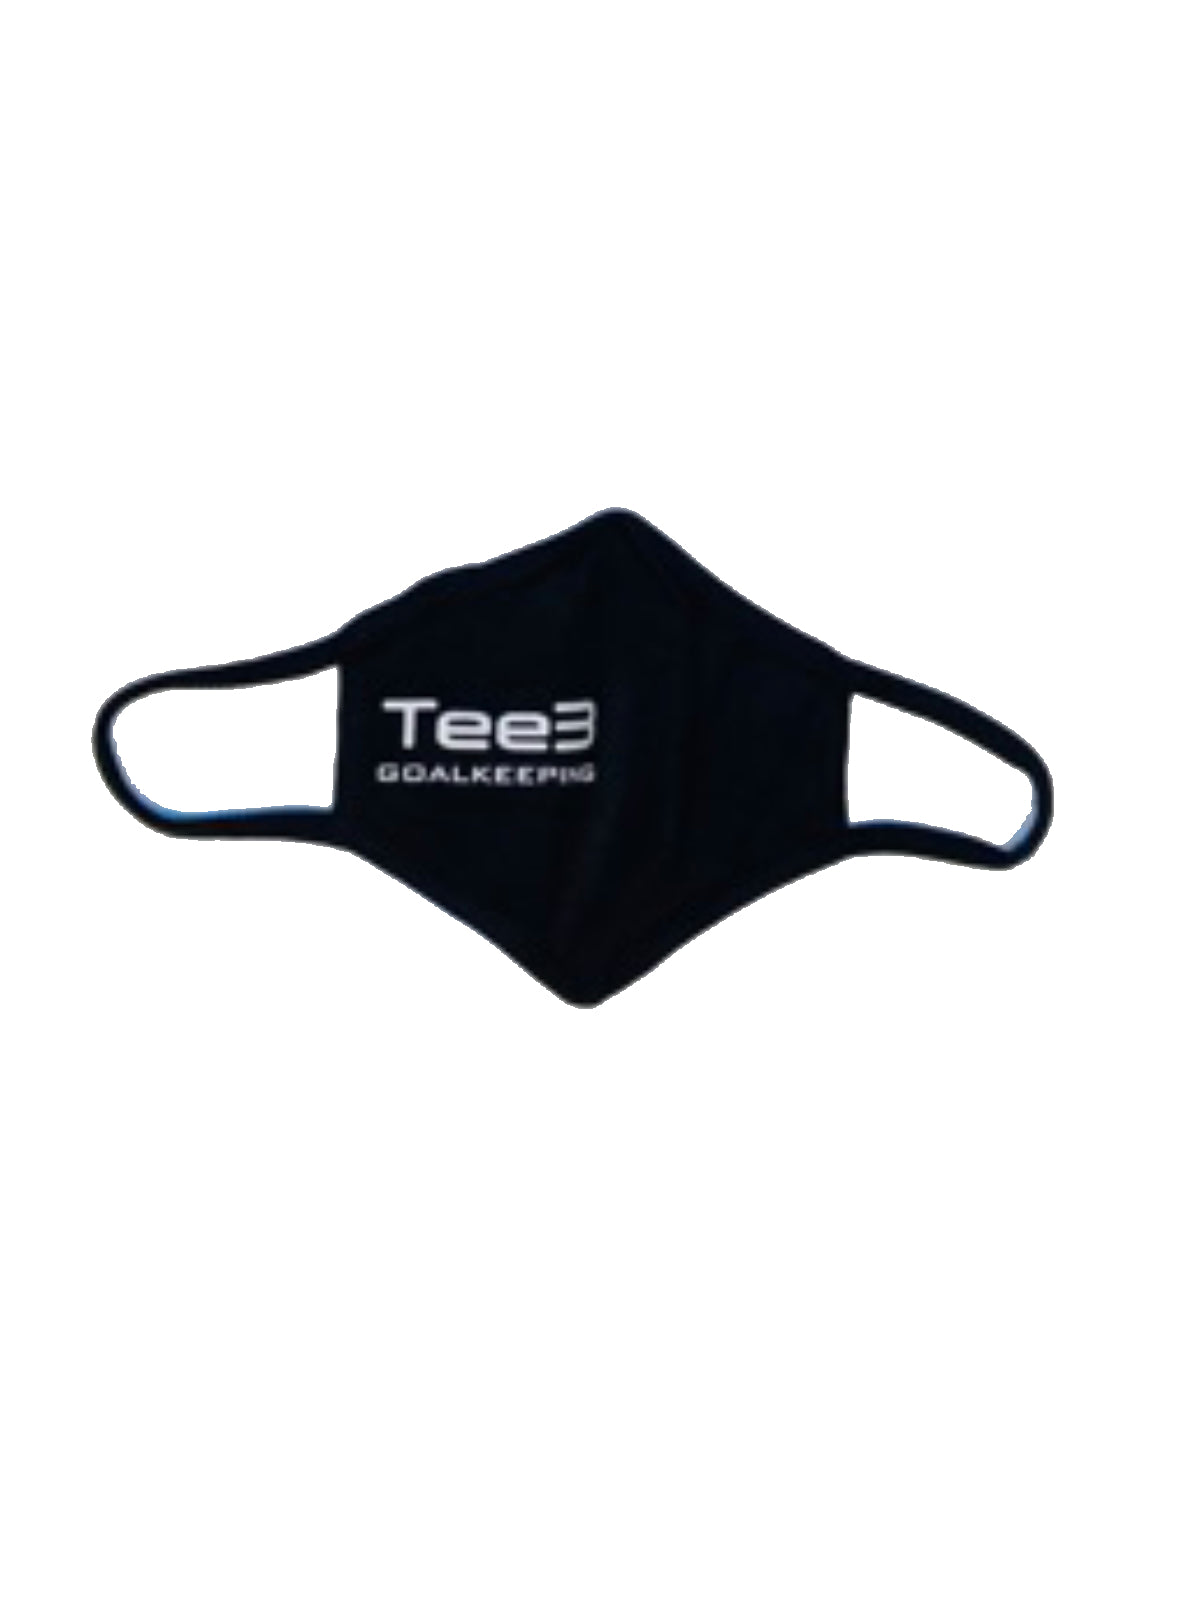 Tee3 Face Mask - Bright White